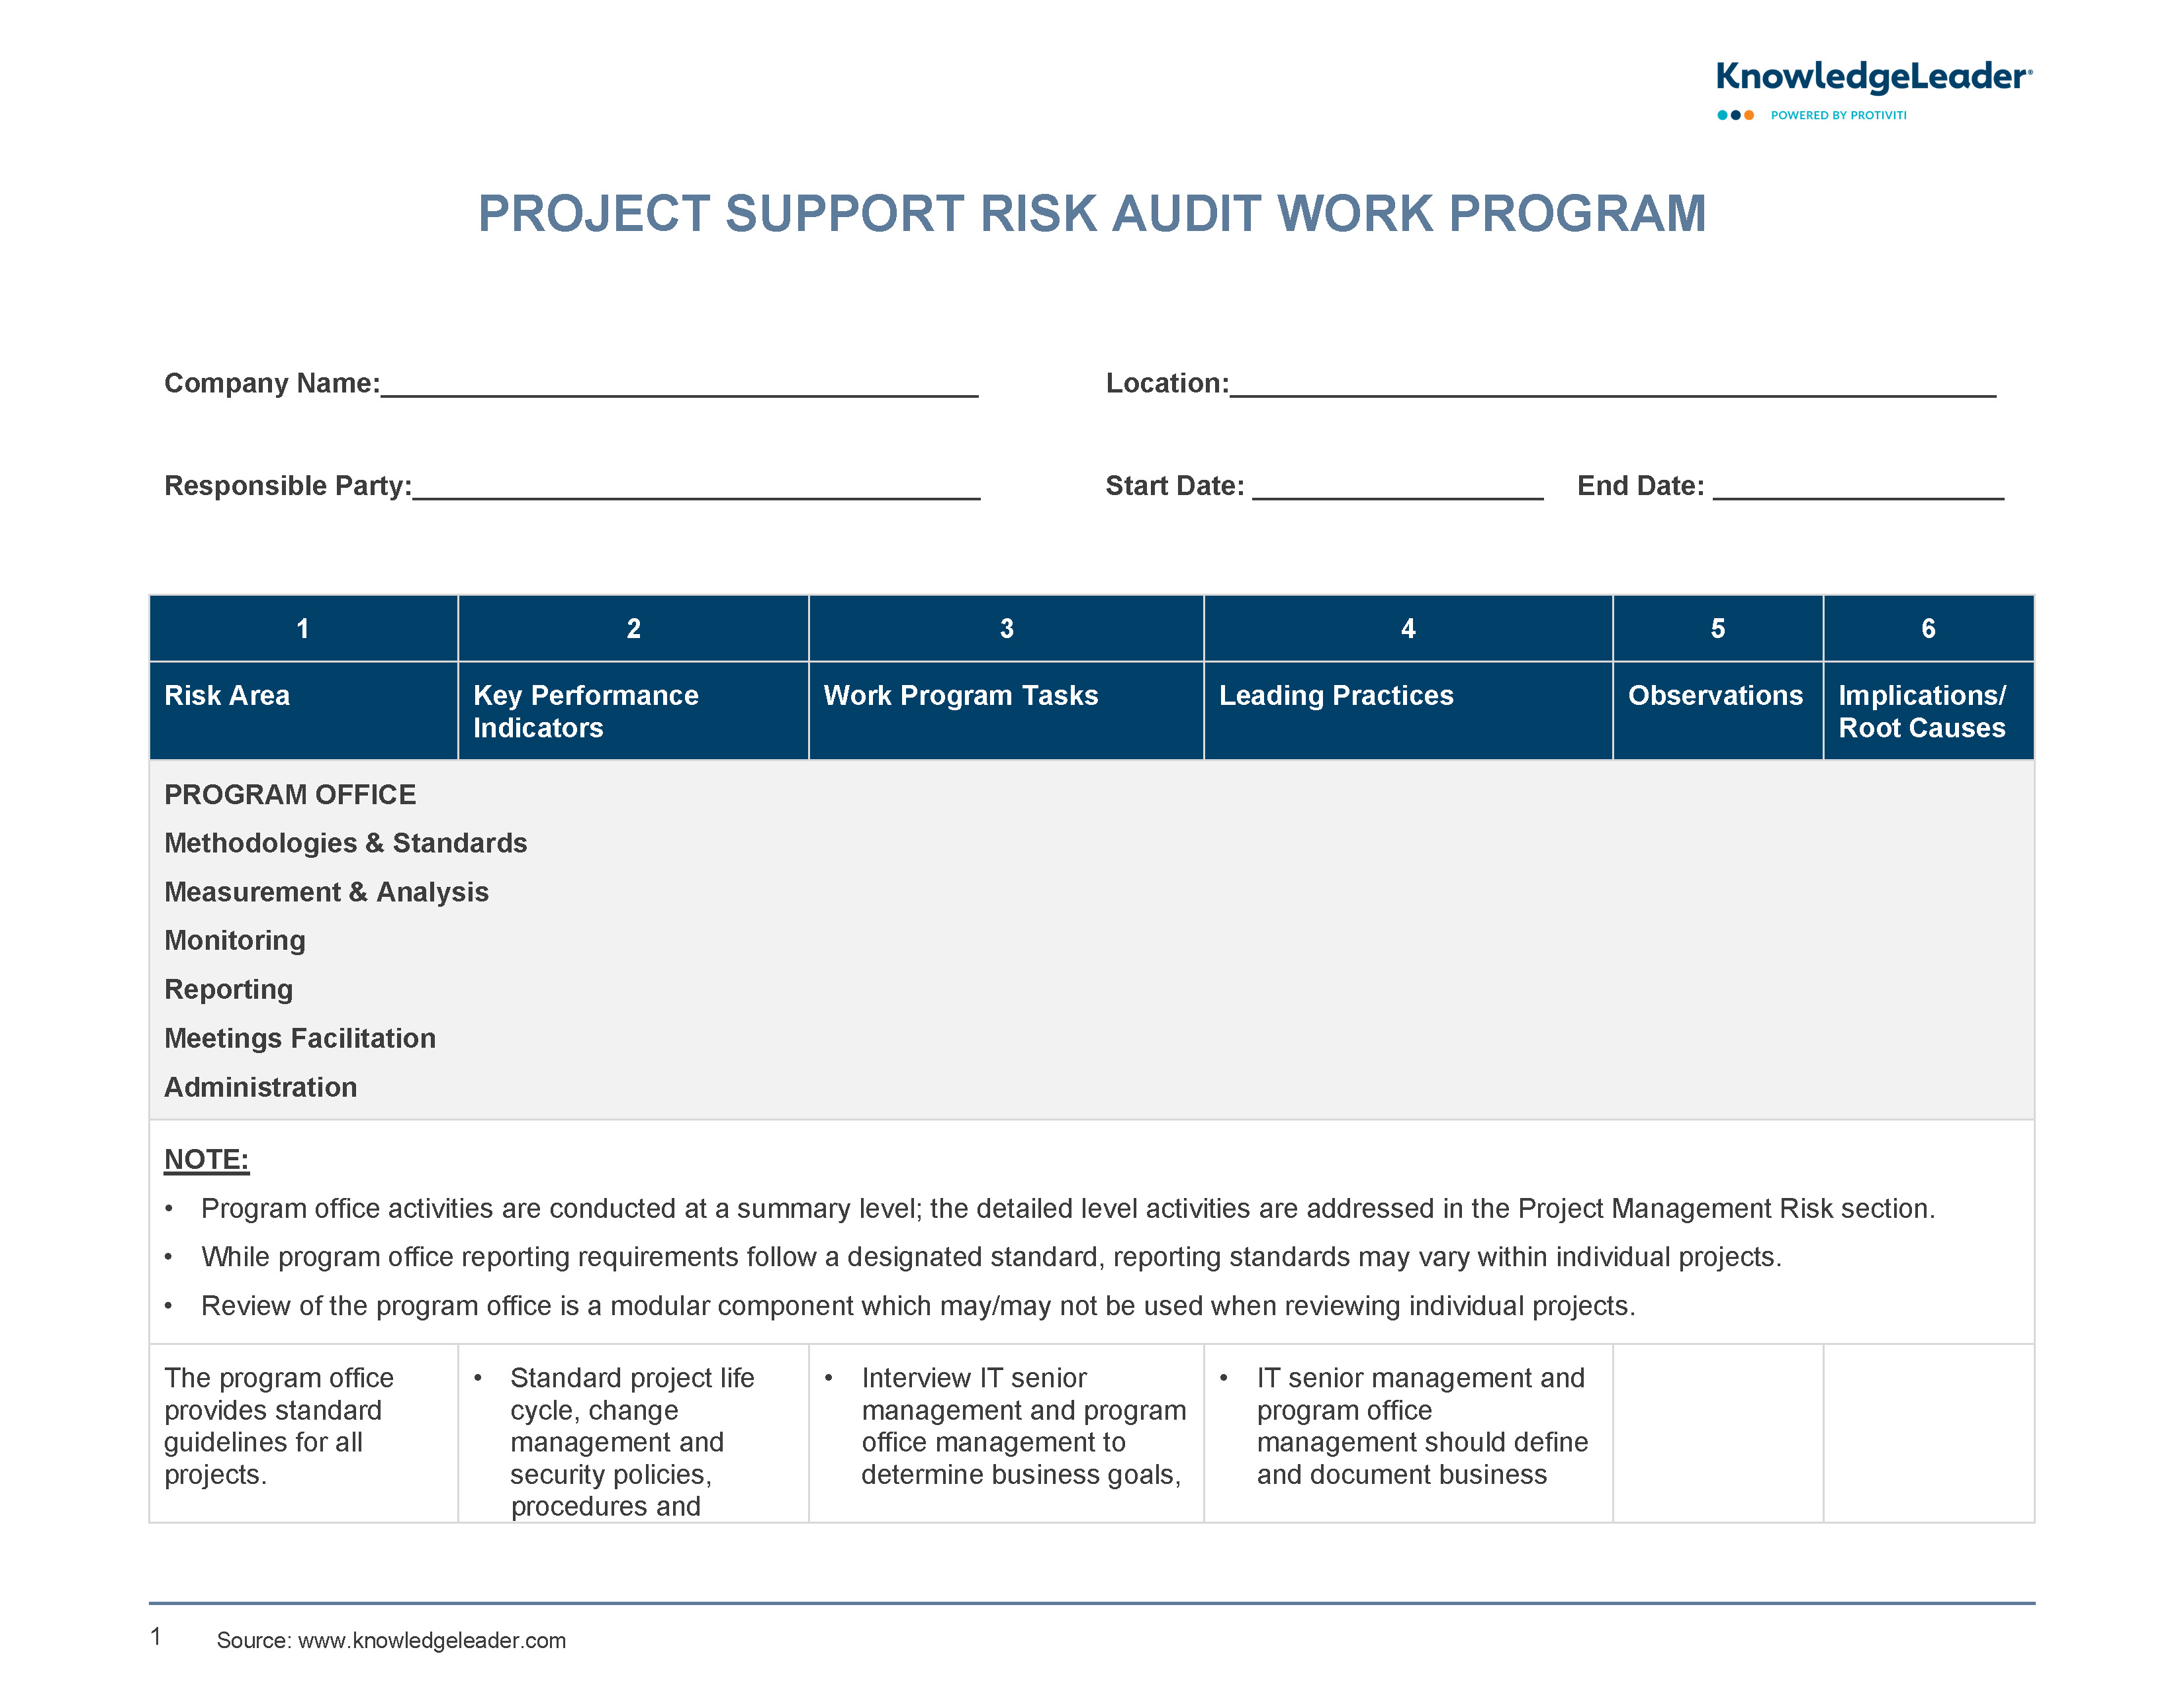 Screenshot of the first page of Project Support Risk Audit Work Program